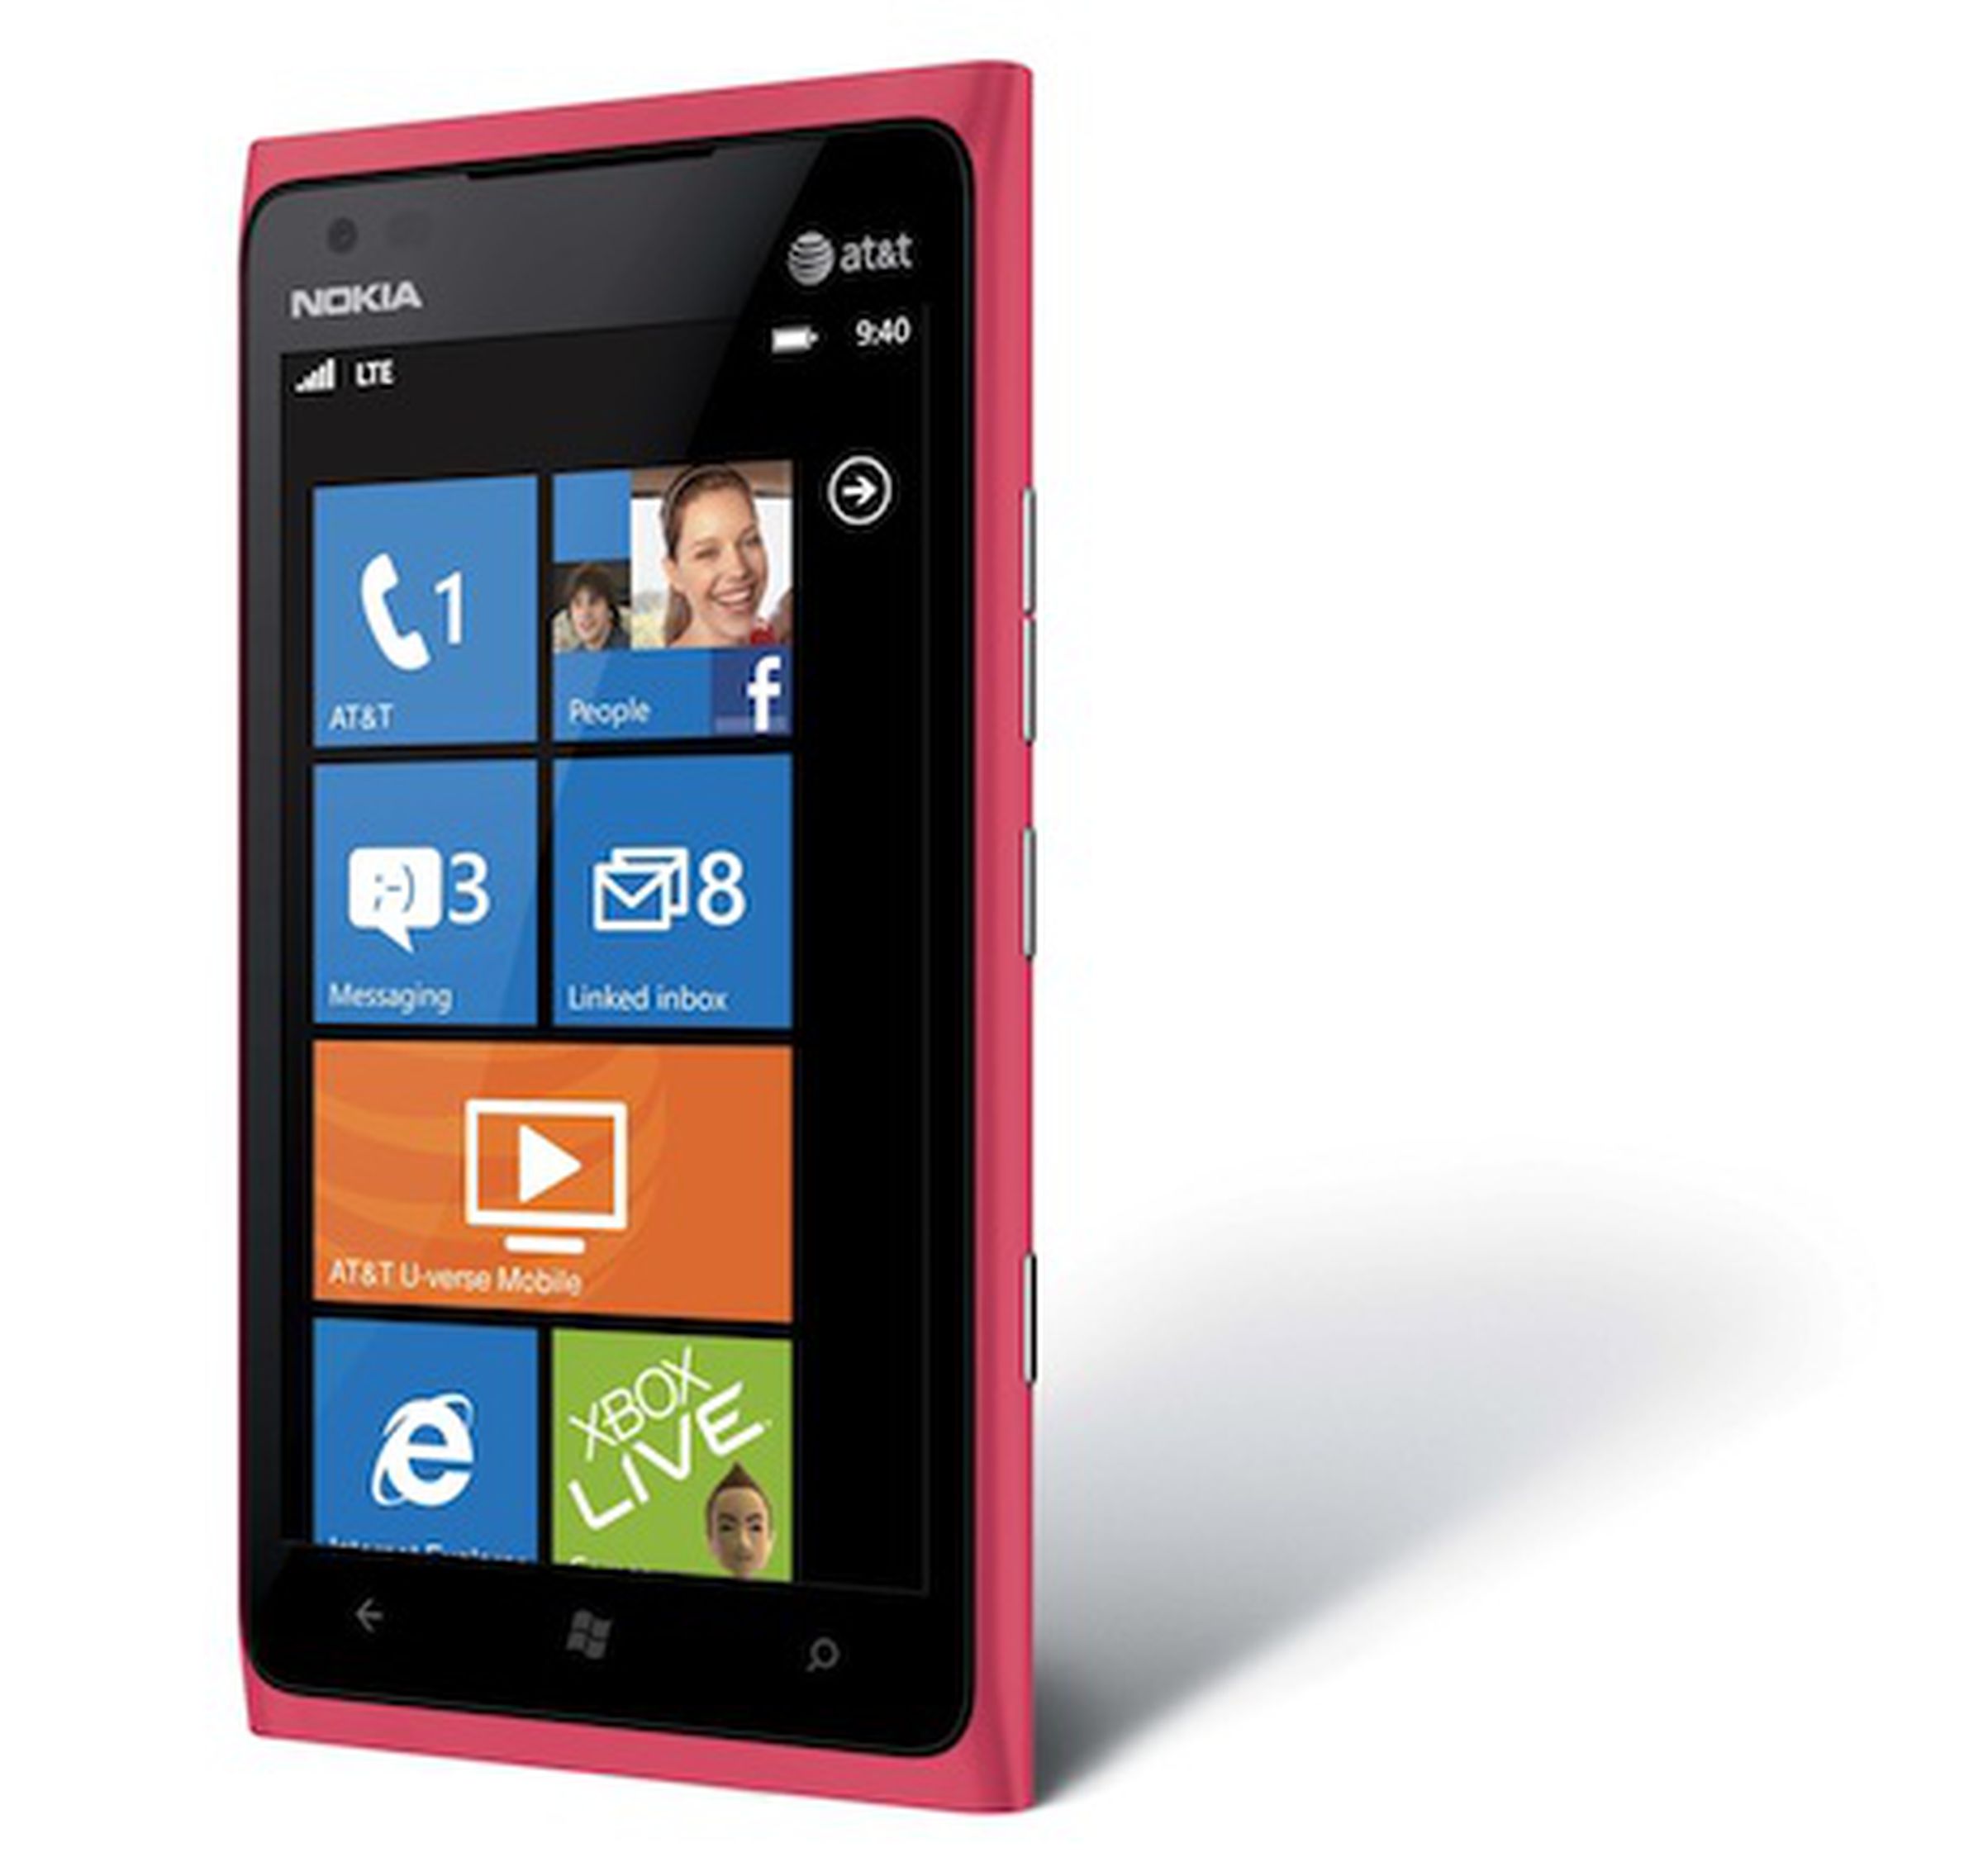 Nokia Lumia 900 pink edition pictures